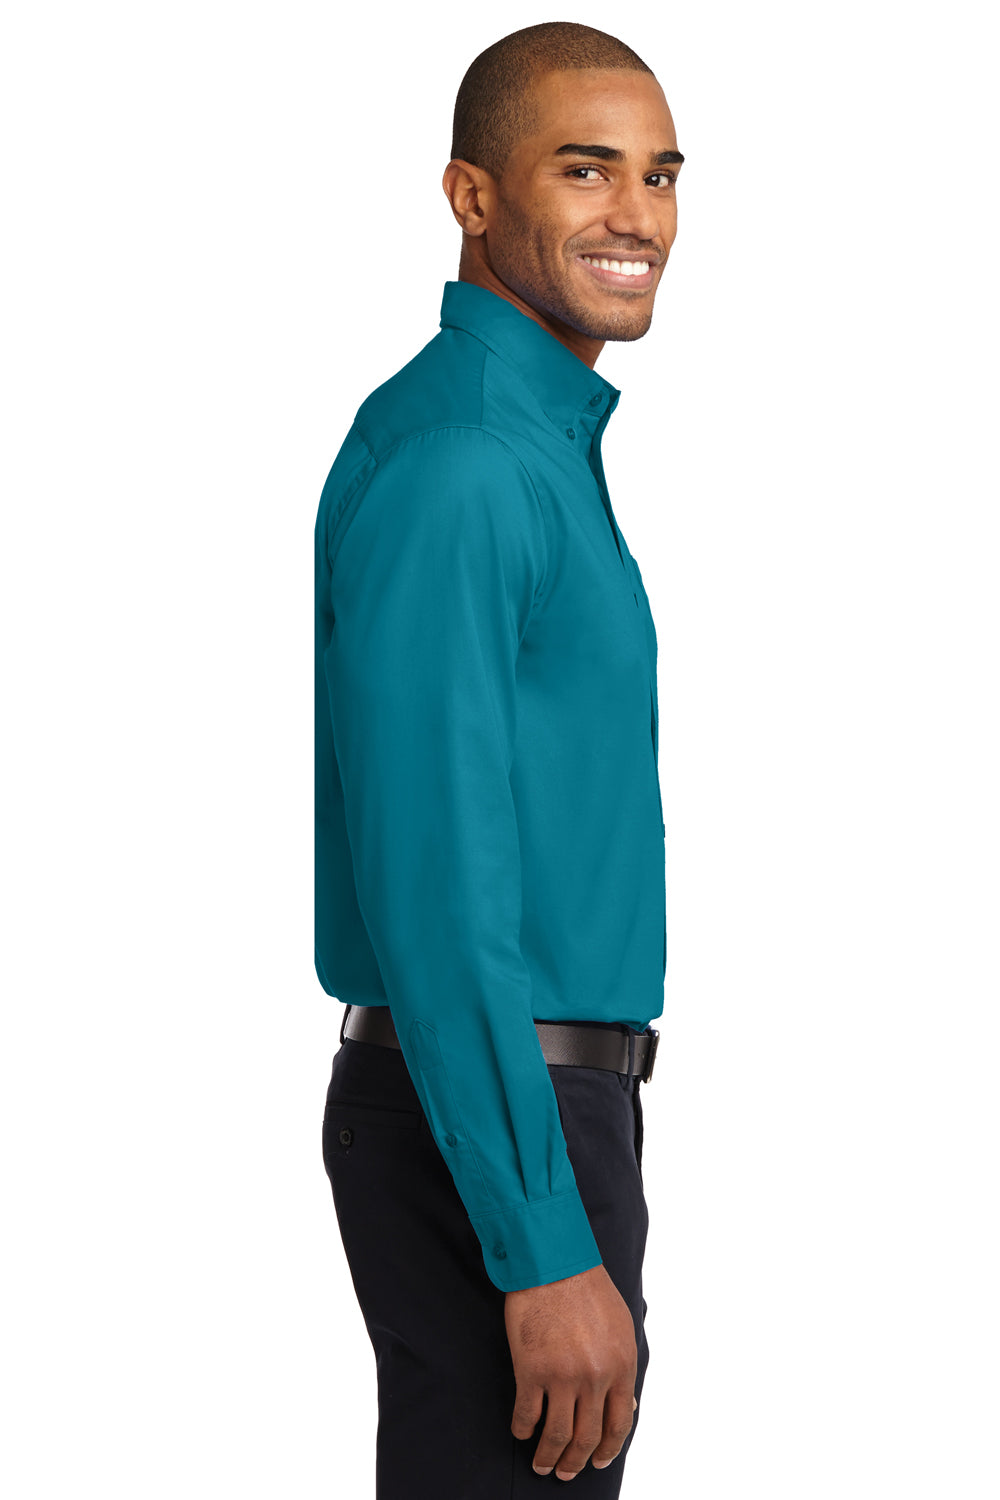 Port Authority S608/TLS608/S608ES Mens Easy Care Wrinkle Resistant Long Sleeve Button Down Shirt w/ Pocket Teal Green Side